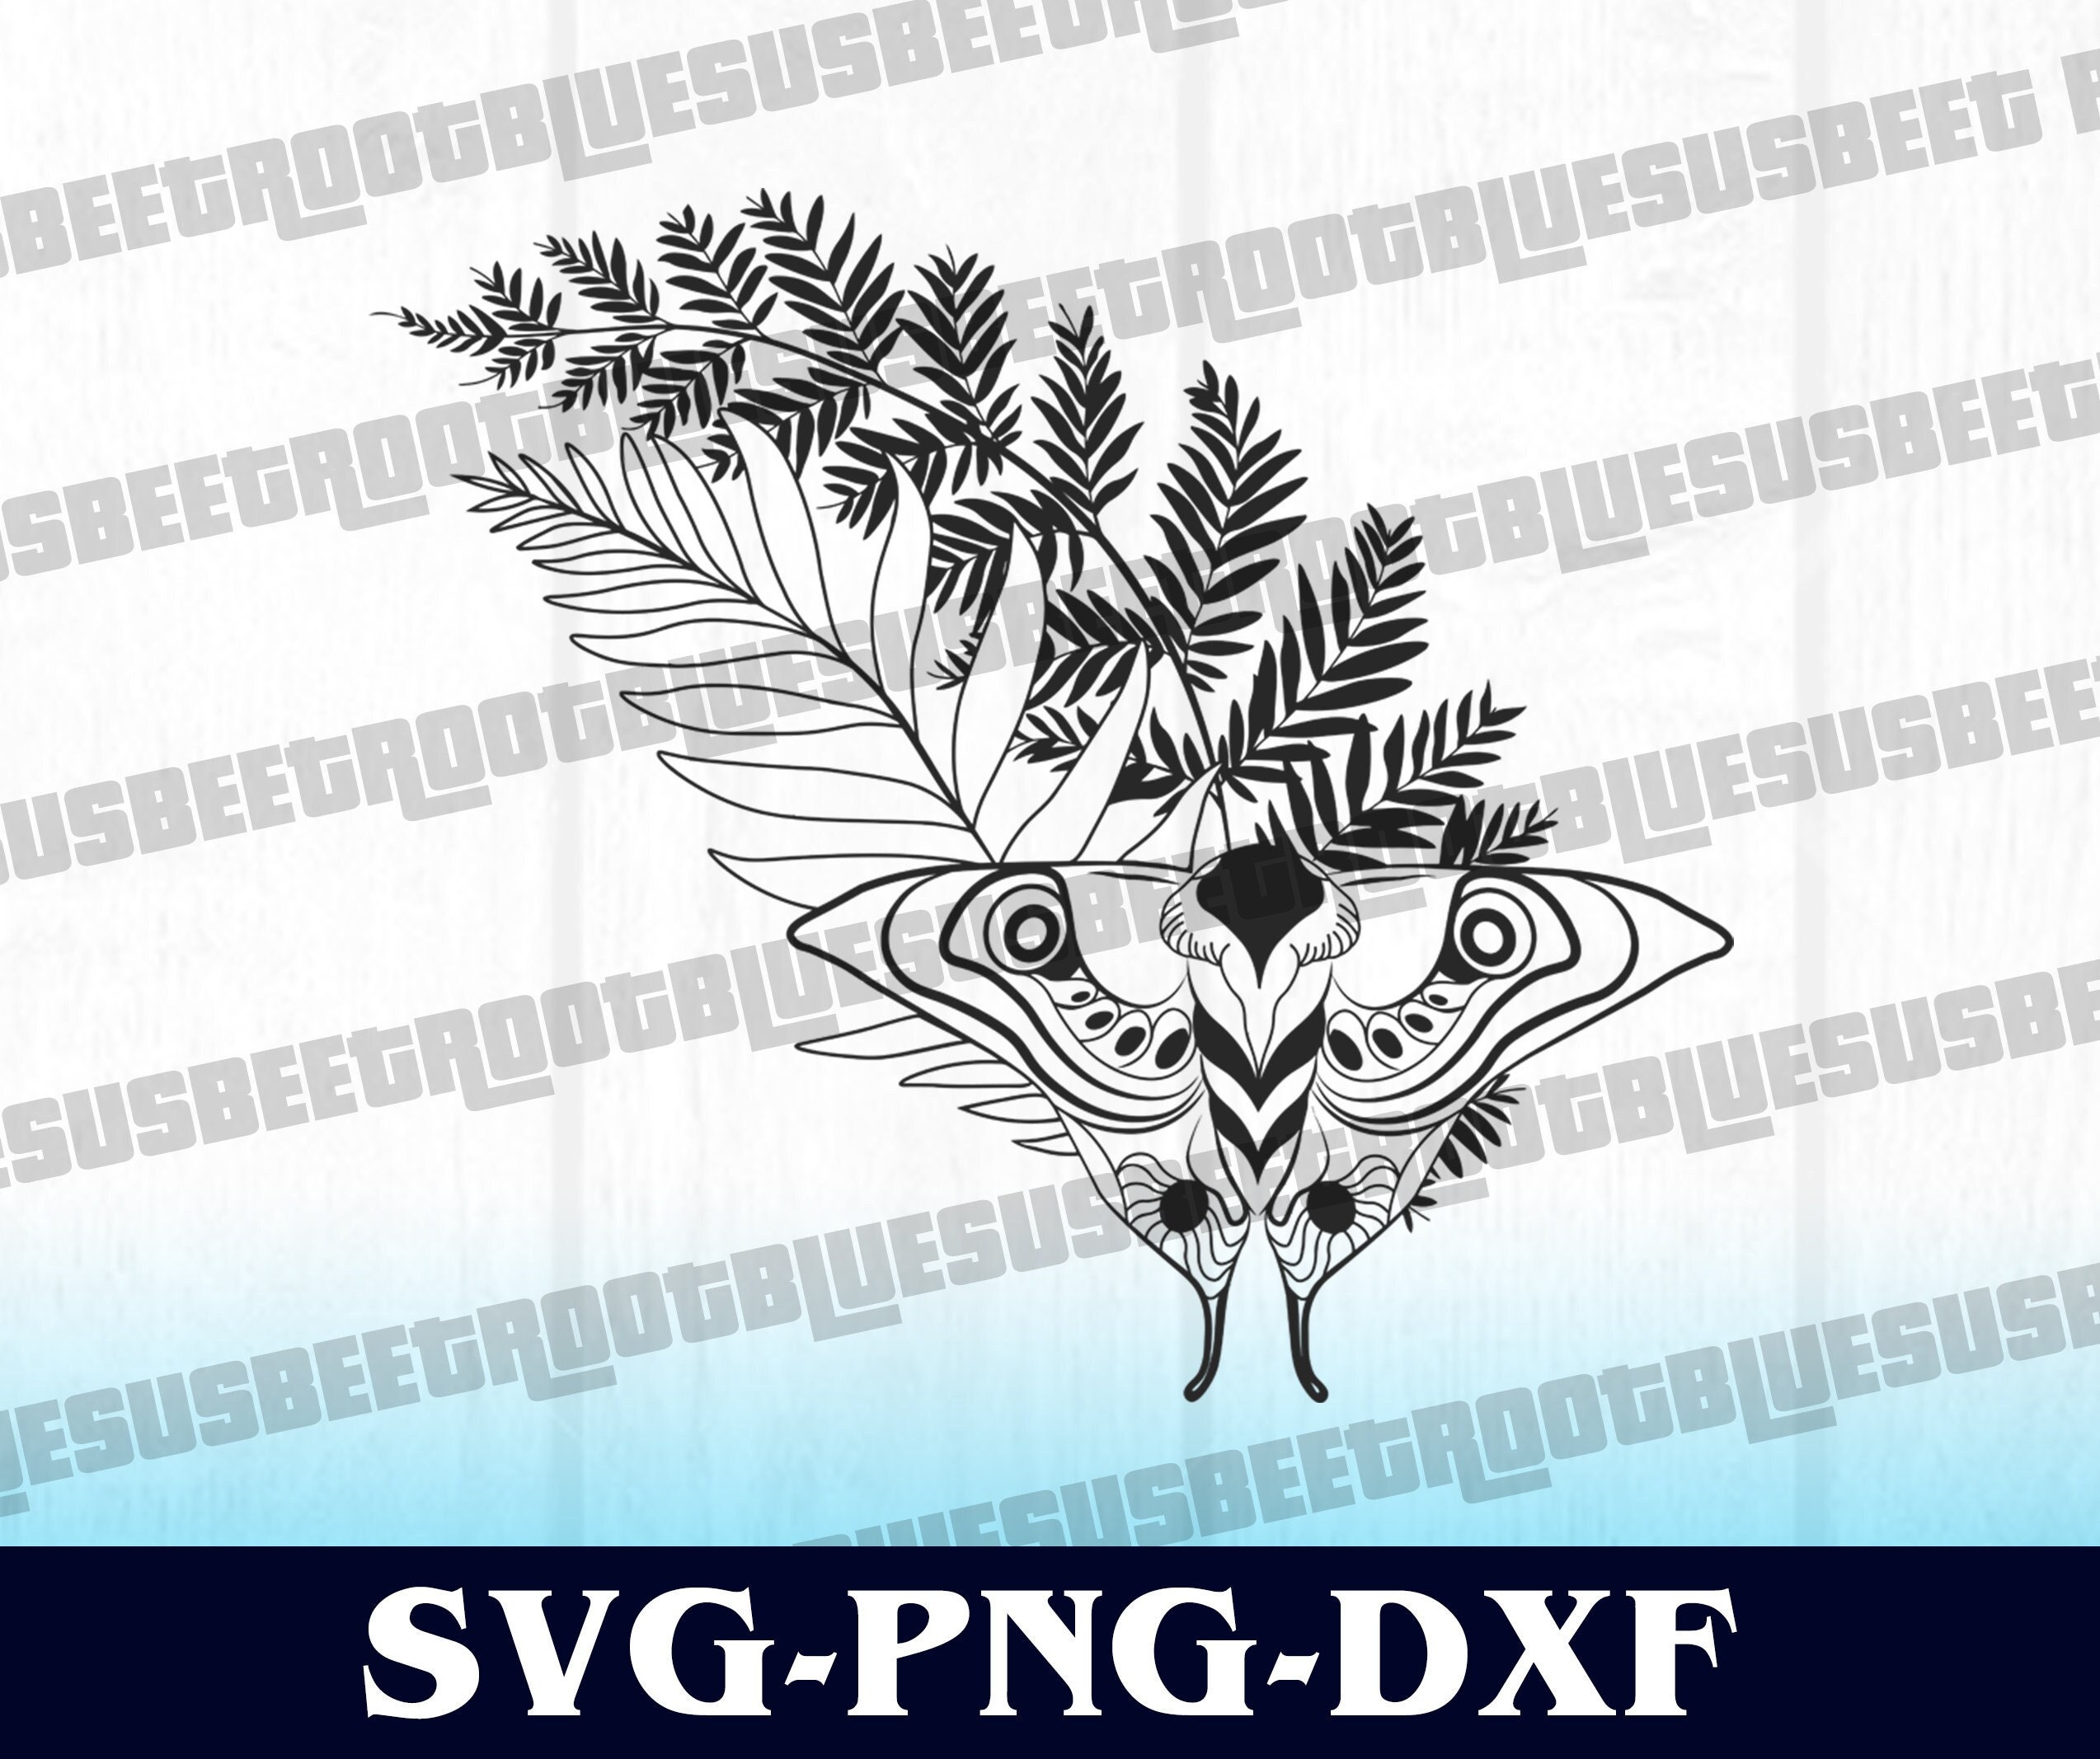 Ellie Tattoo Svgthe Last of Us Tattoo SVG Files (Download Now) 